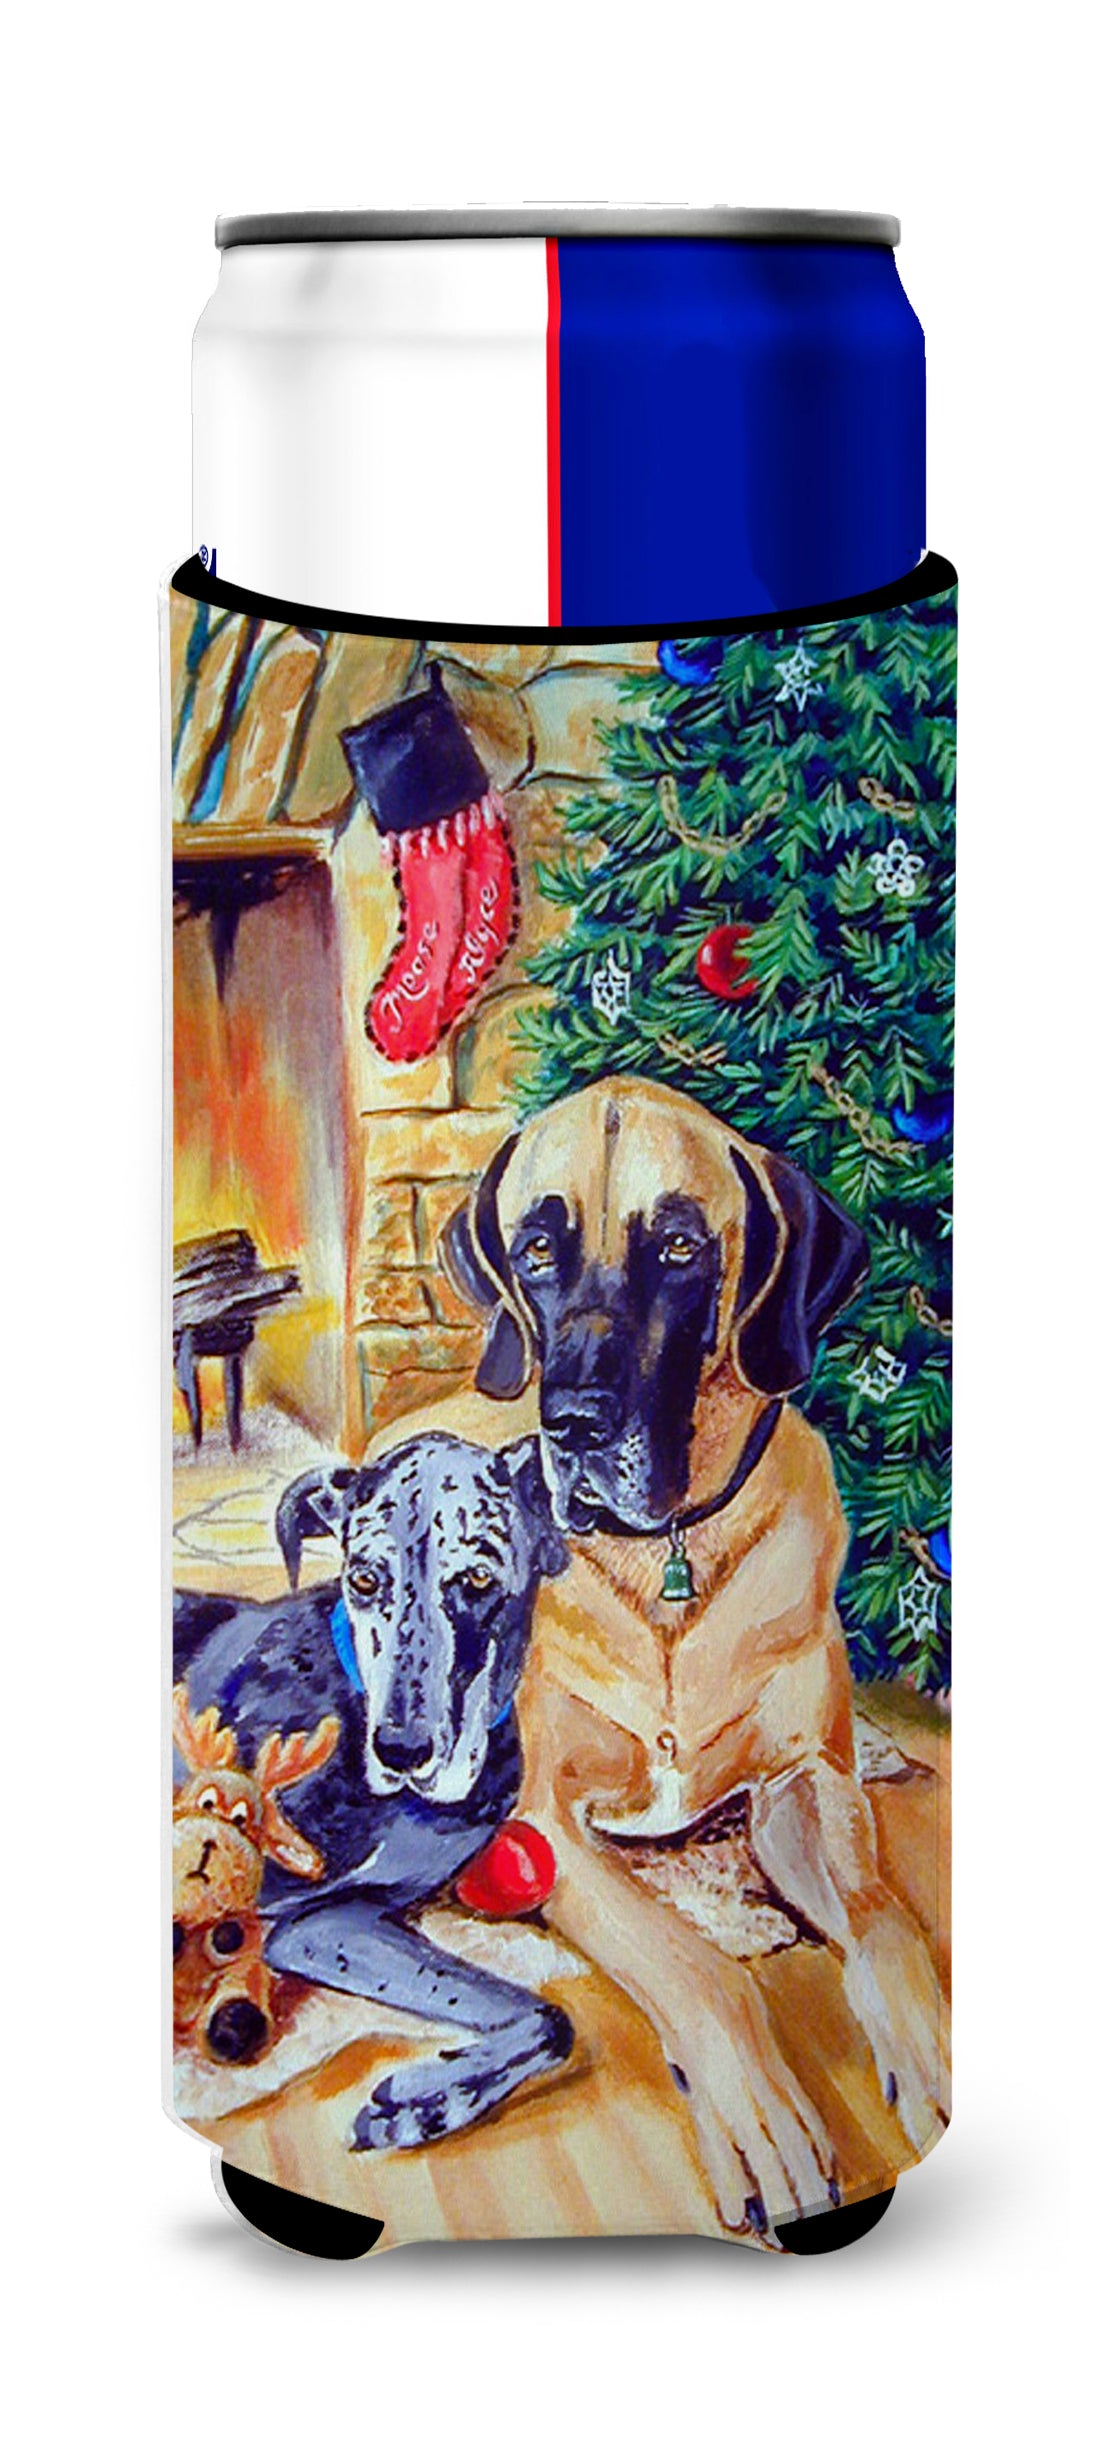 Fawn and Blue Great Dane waiting on Christmas Ultra Beverage Insulators for slim cans 7111MUK.